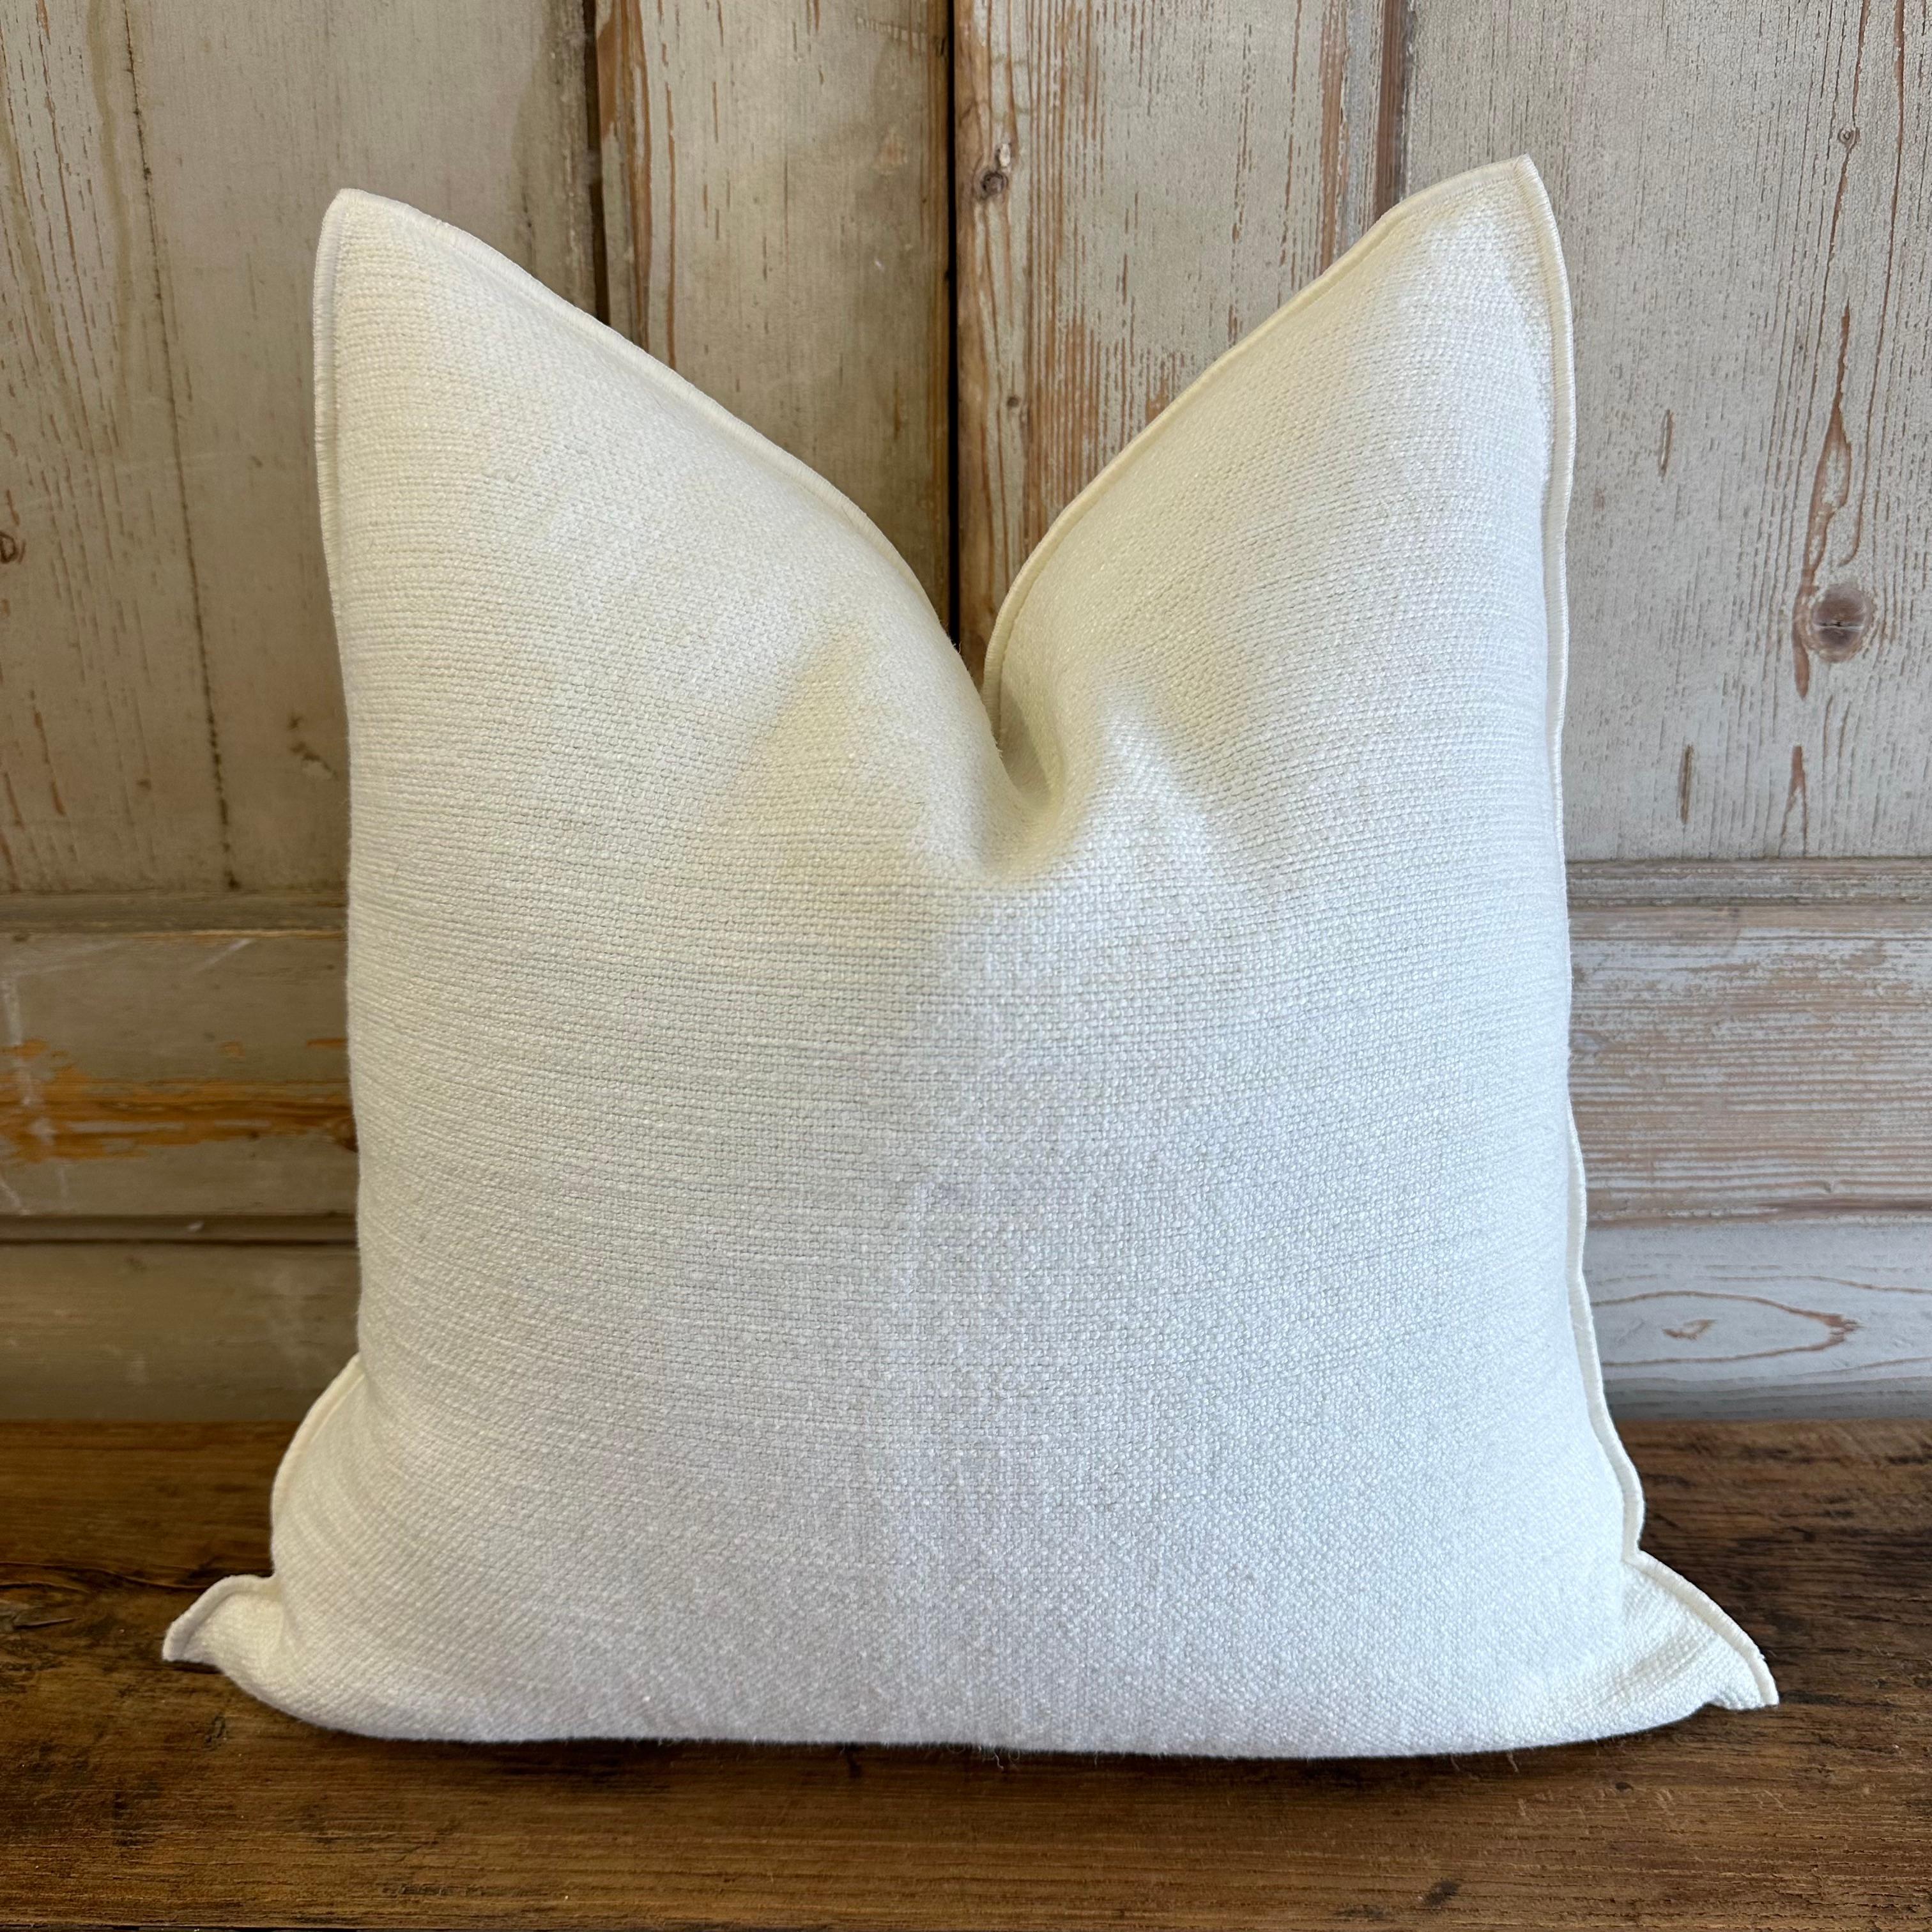 Nomade: Custom linen blend accent pillow. 
Color: White
A pretty oystery white color (not optic white)
Includes insert
Texture: nubby style pillow with a stitched edge, metal zipper closure. 
Our pillows are constructed with vintage one of a kind